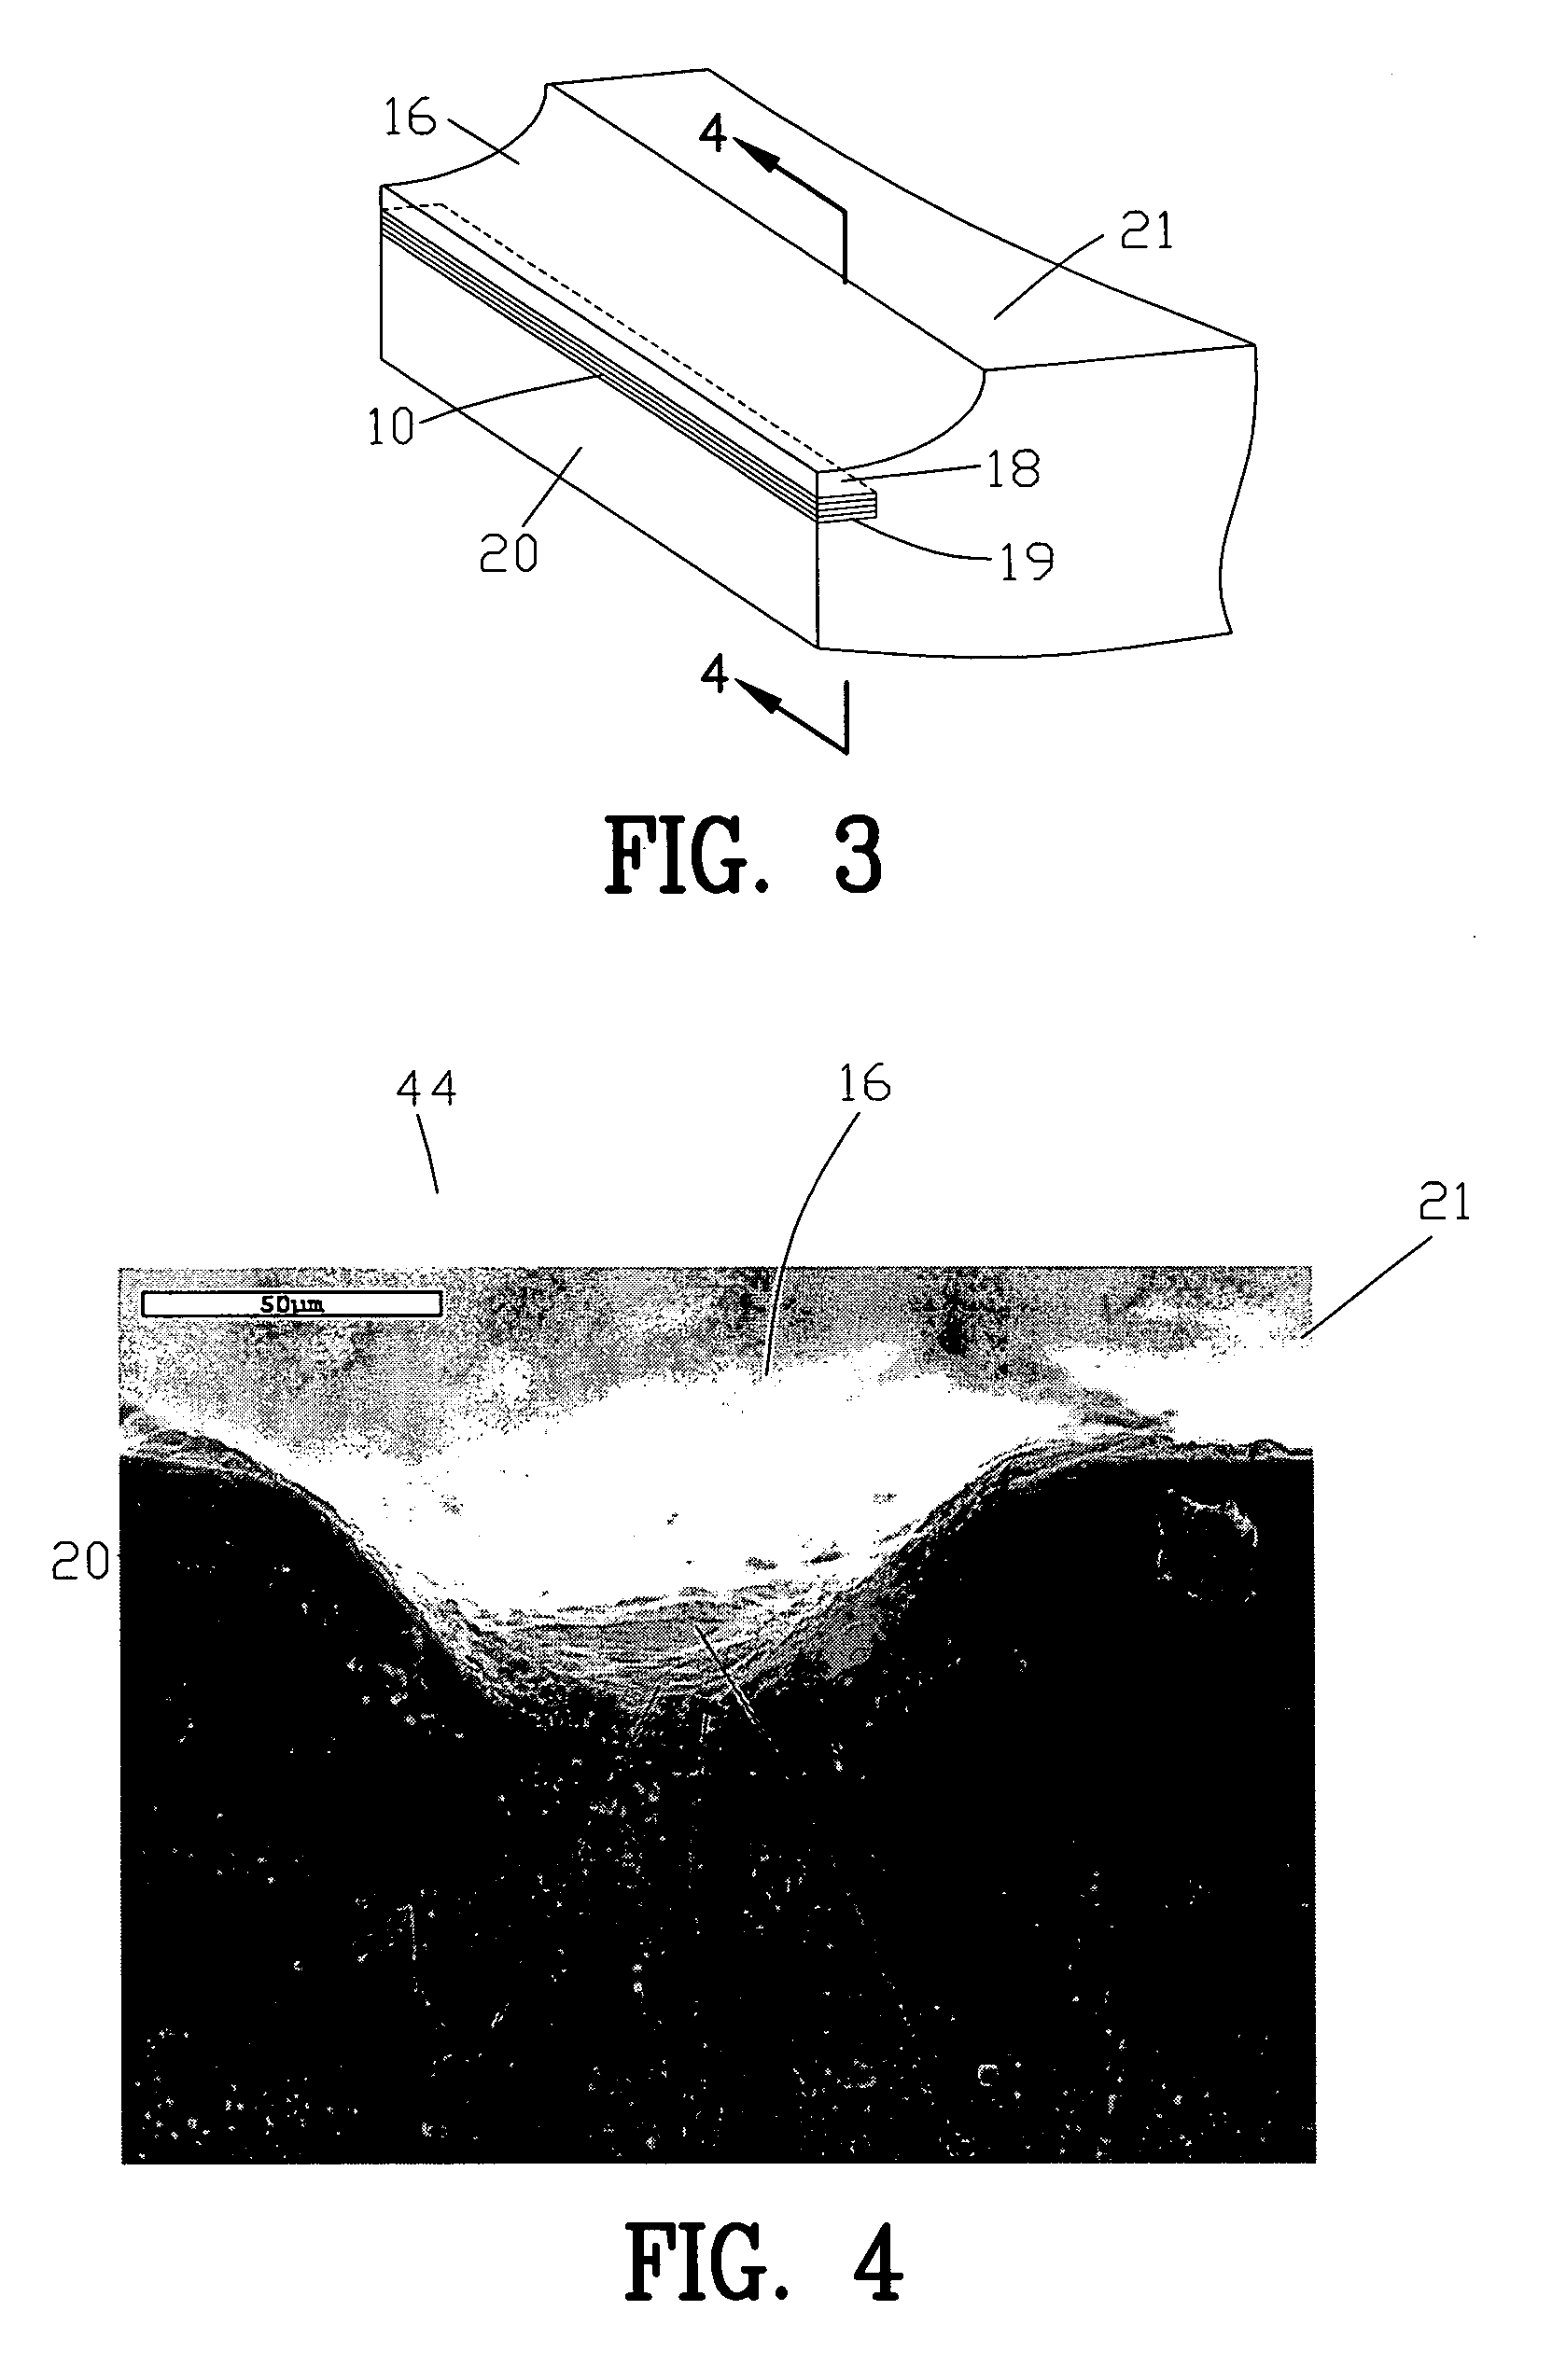 Nano-size semiconductor component and method of making